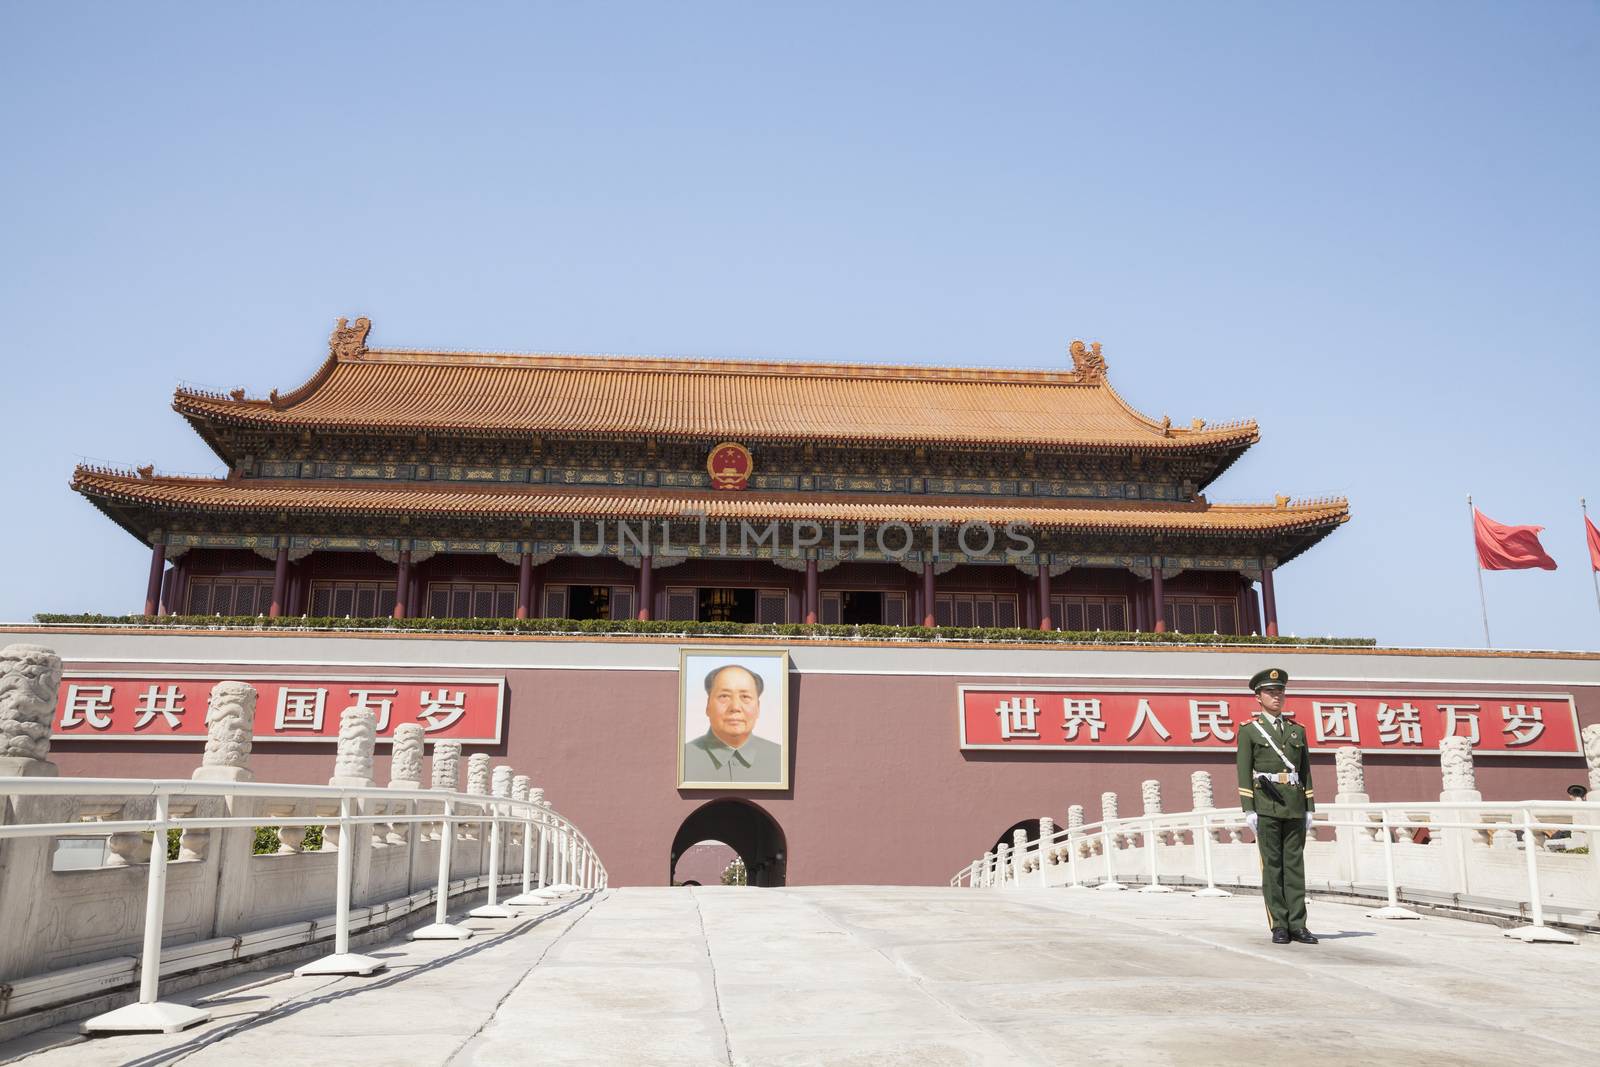 Tiananmen Square, Gate of Heavenly Peace with Mao's Portrait and guard, Beijing, China. by XiXinXing